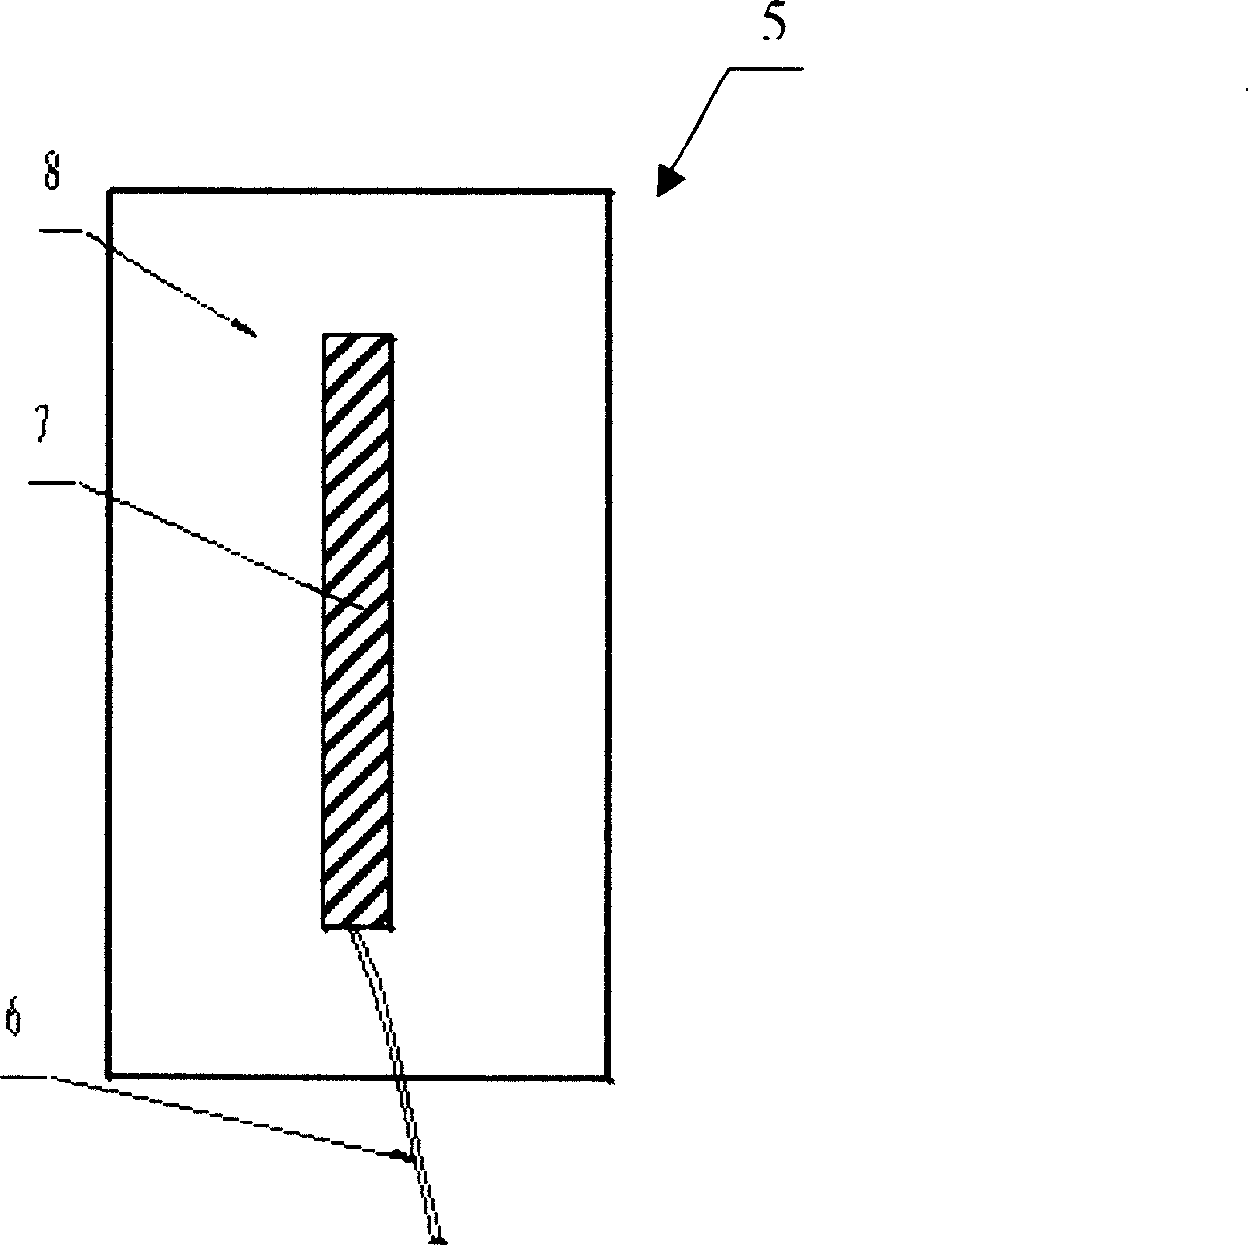 Equipment and method for measuring material damping factor